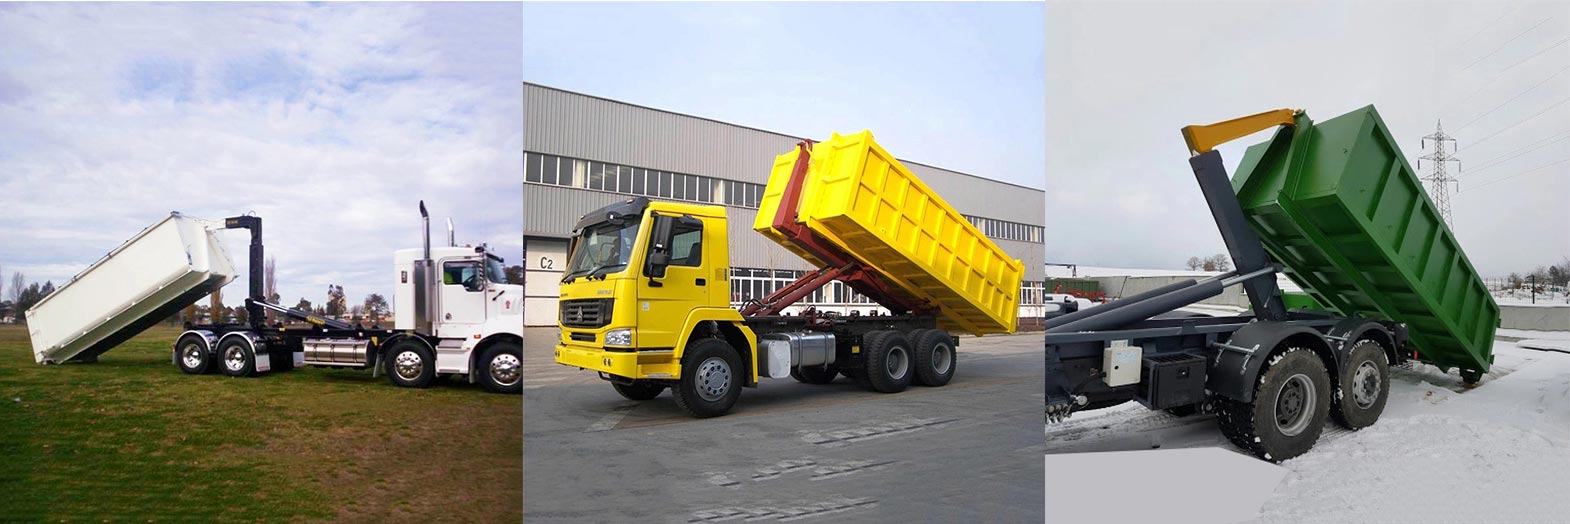 Koukkulift Containers